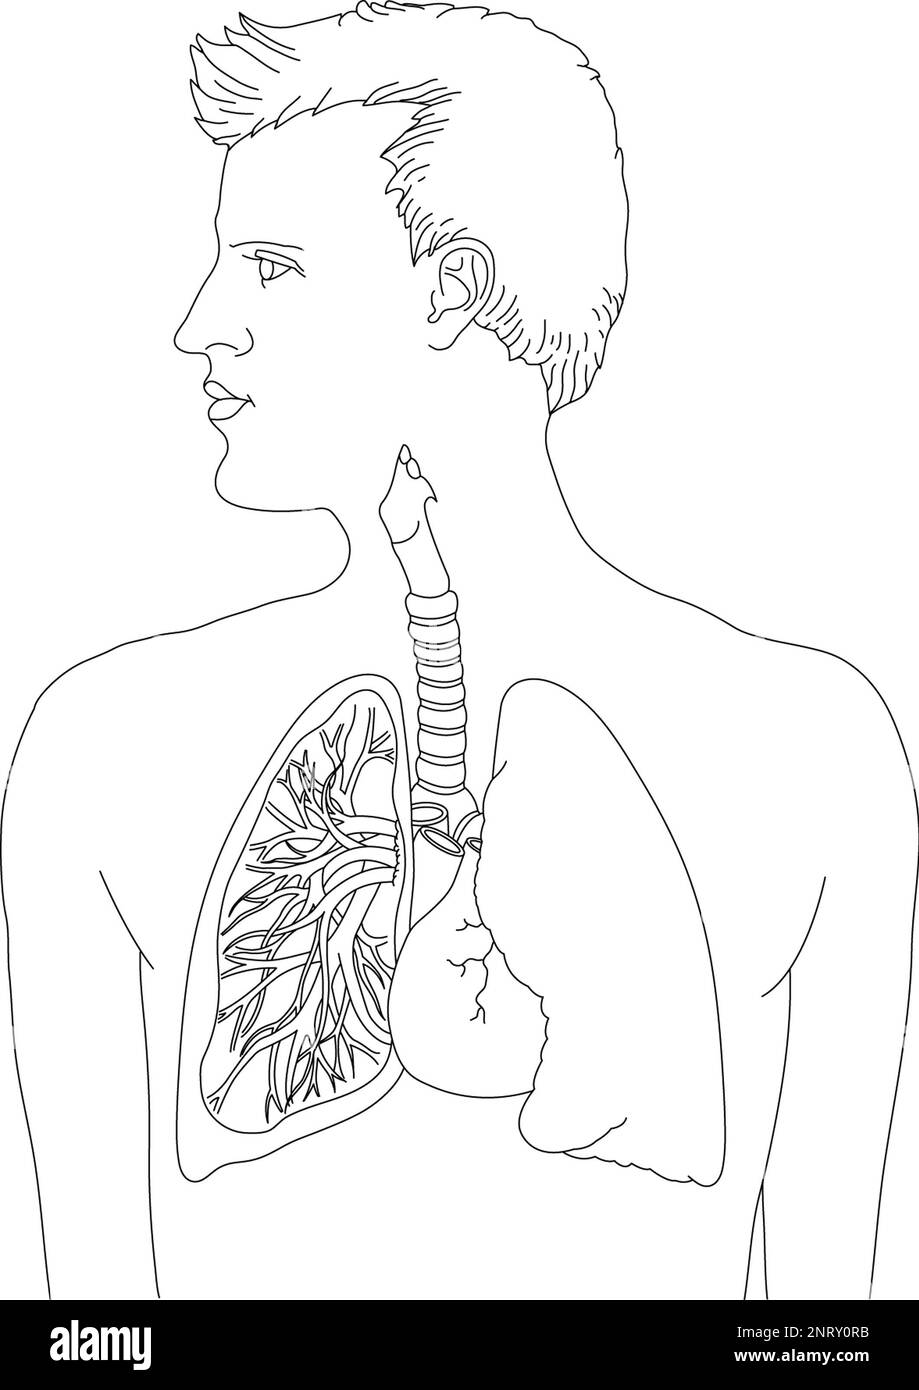 Black and white medical line drawing showing a man in profile, lungs & respiratory system, shown are left bronchi, heart, trachea (windpipe), & lungs. Stock Photo